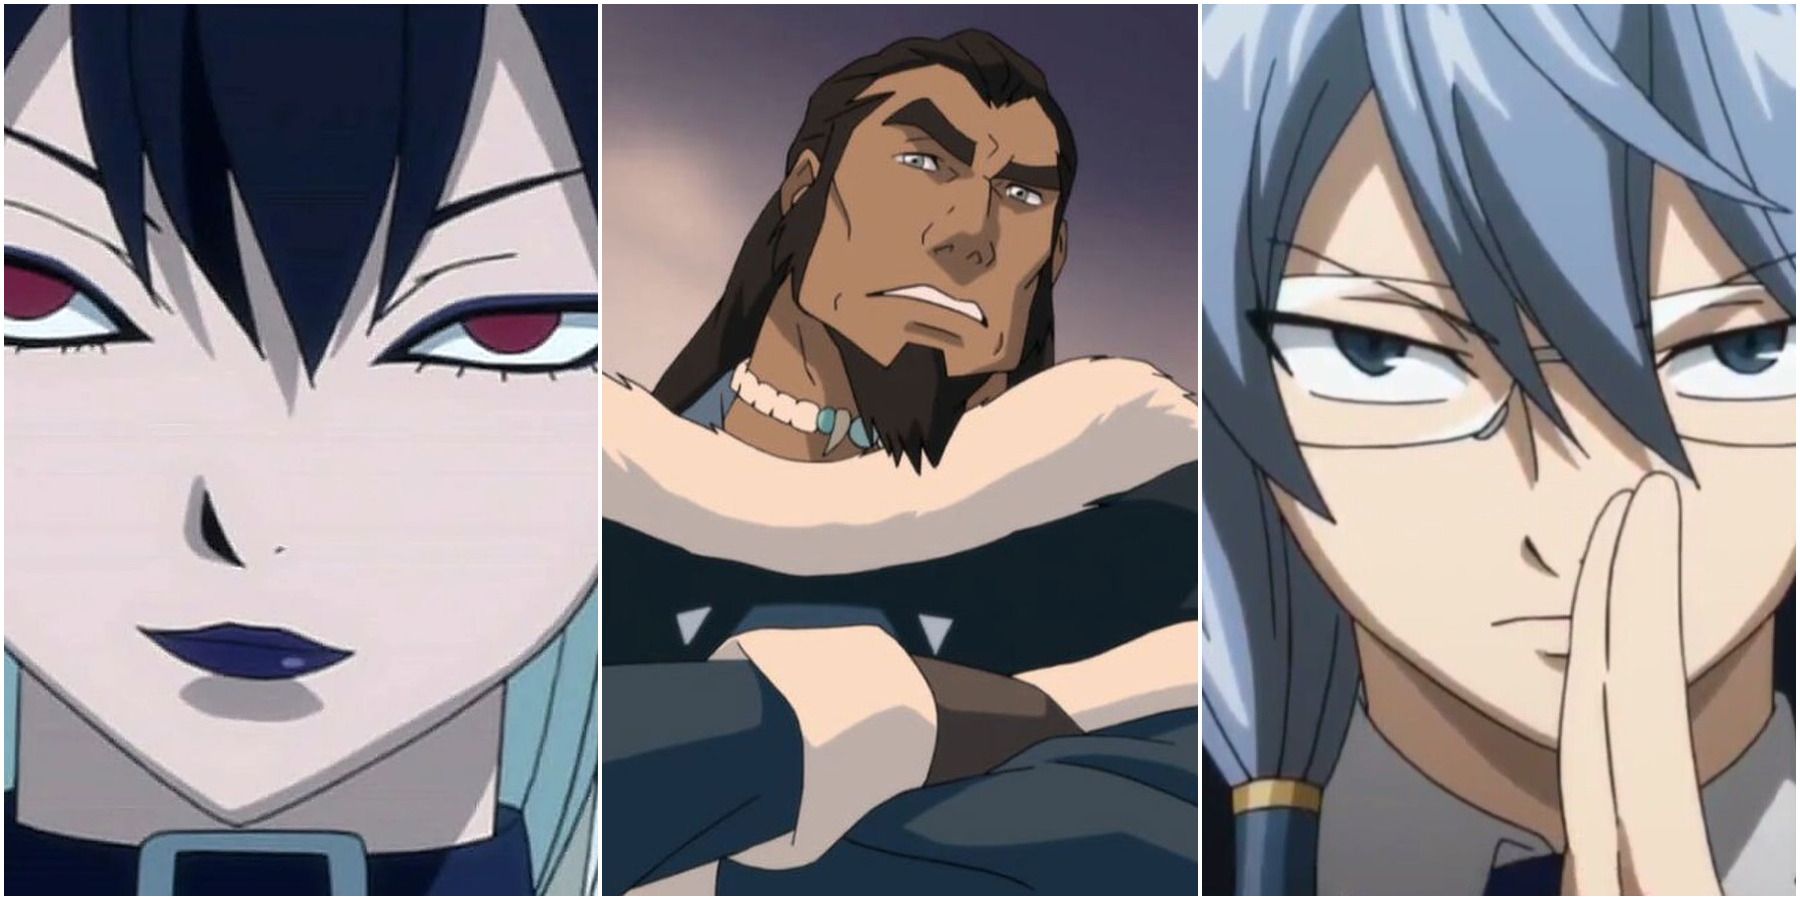 Fairy Tail: 10 Characters Who Would Make Great Waterbenders